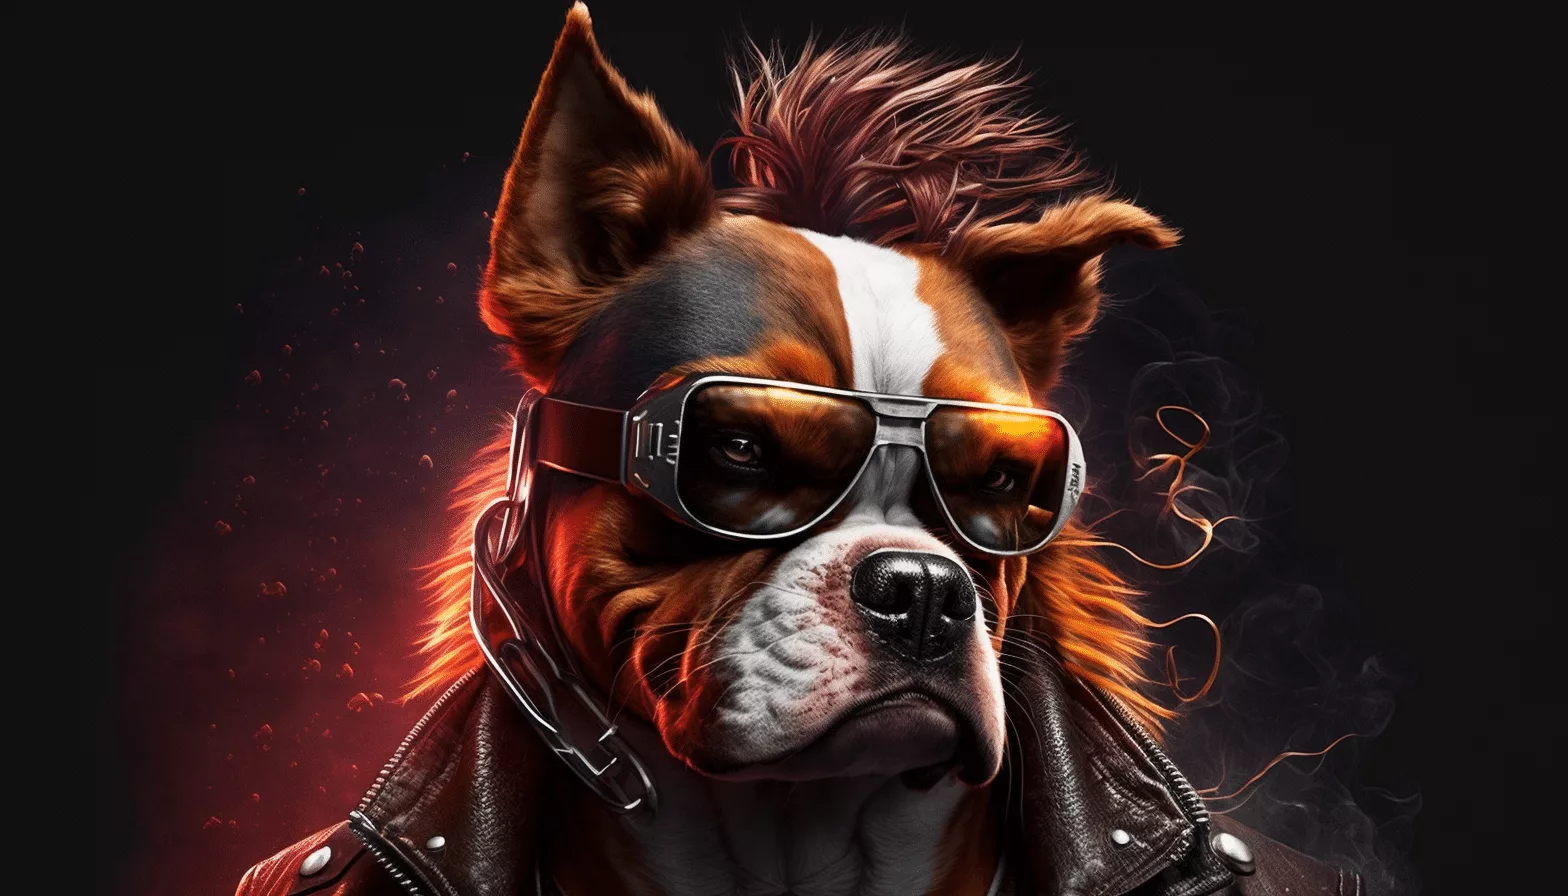 A dog wearing sunglasses and a leather jacket.